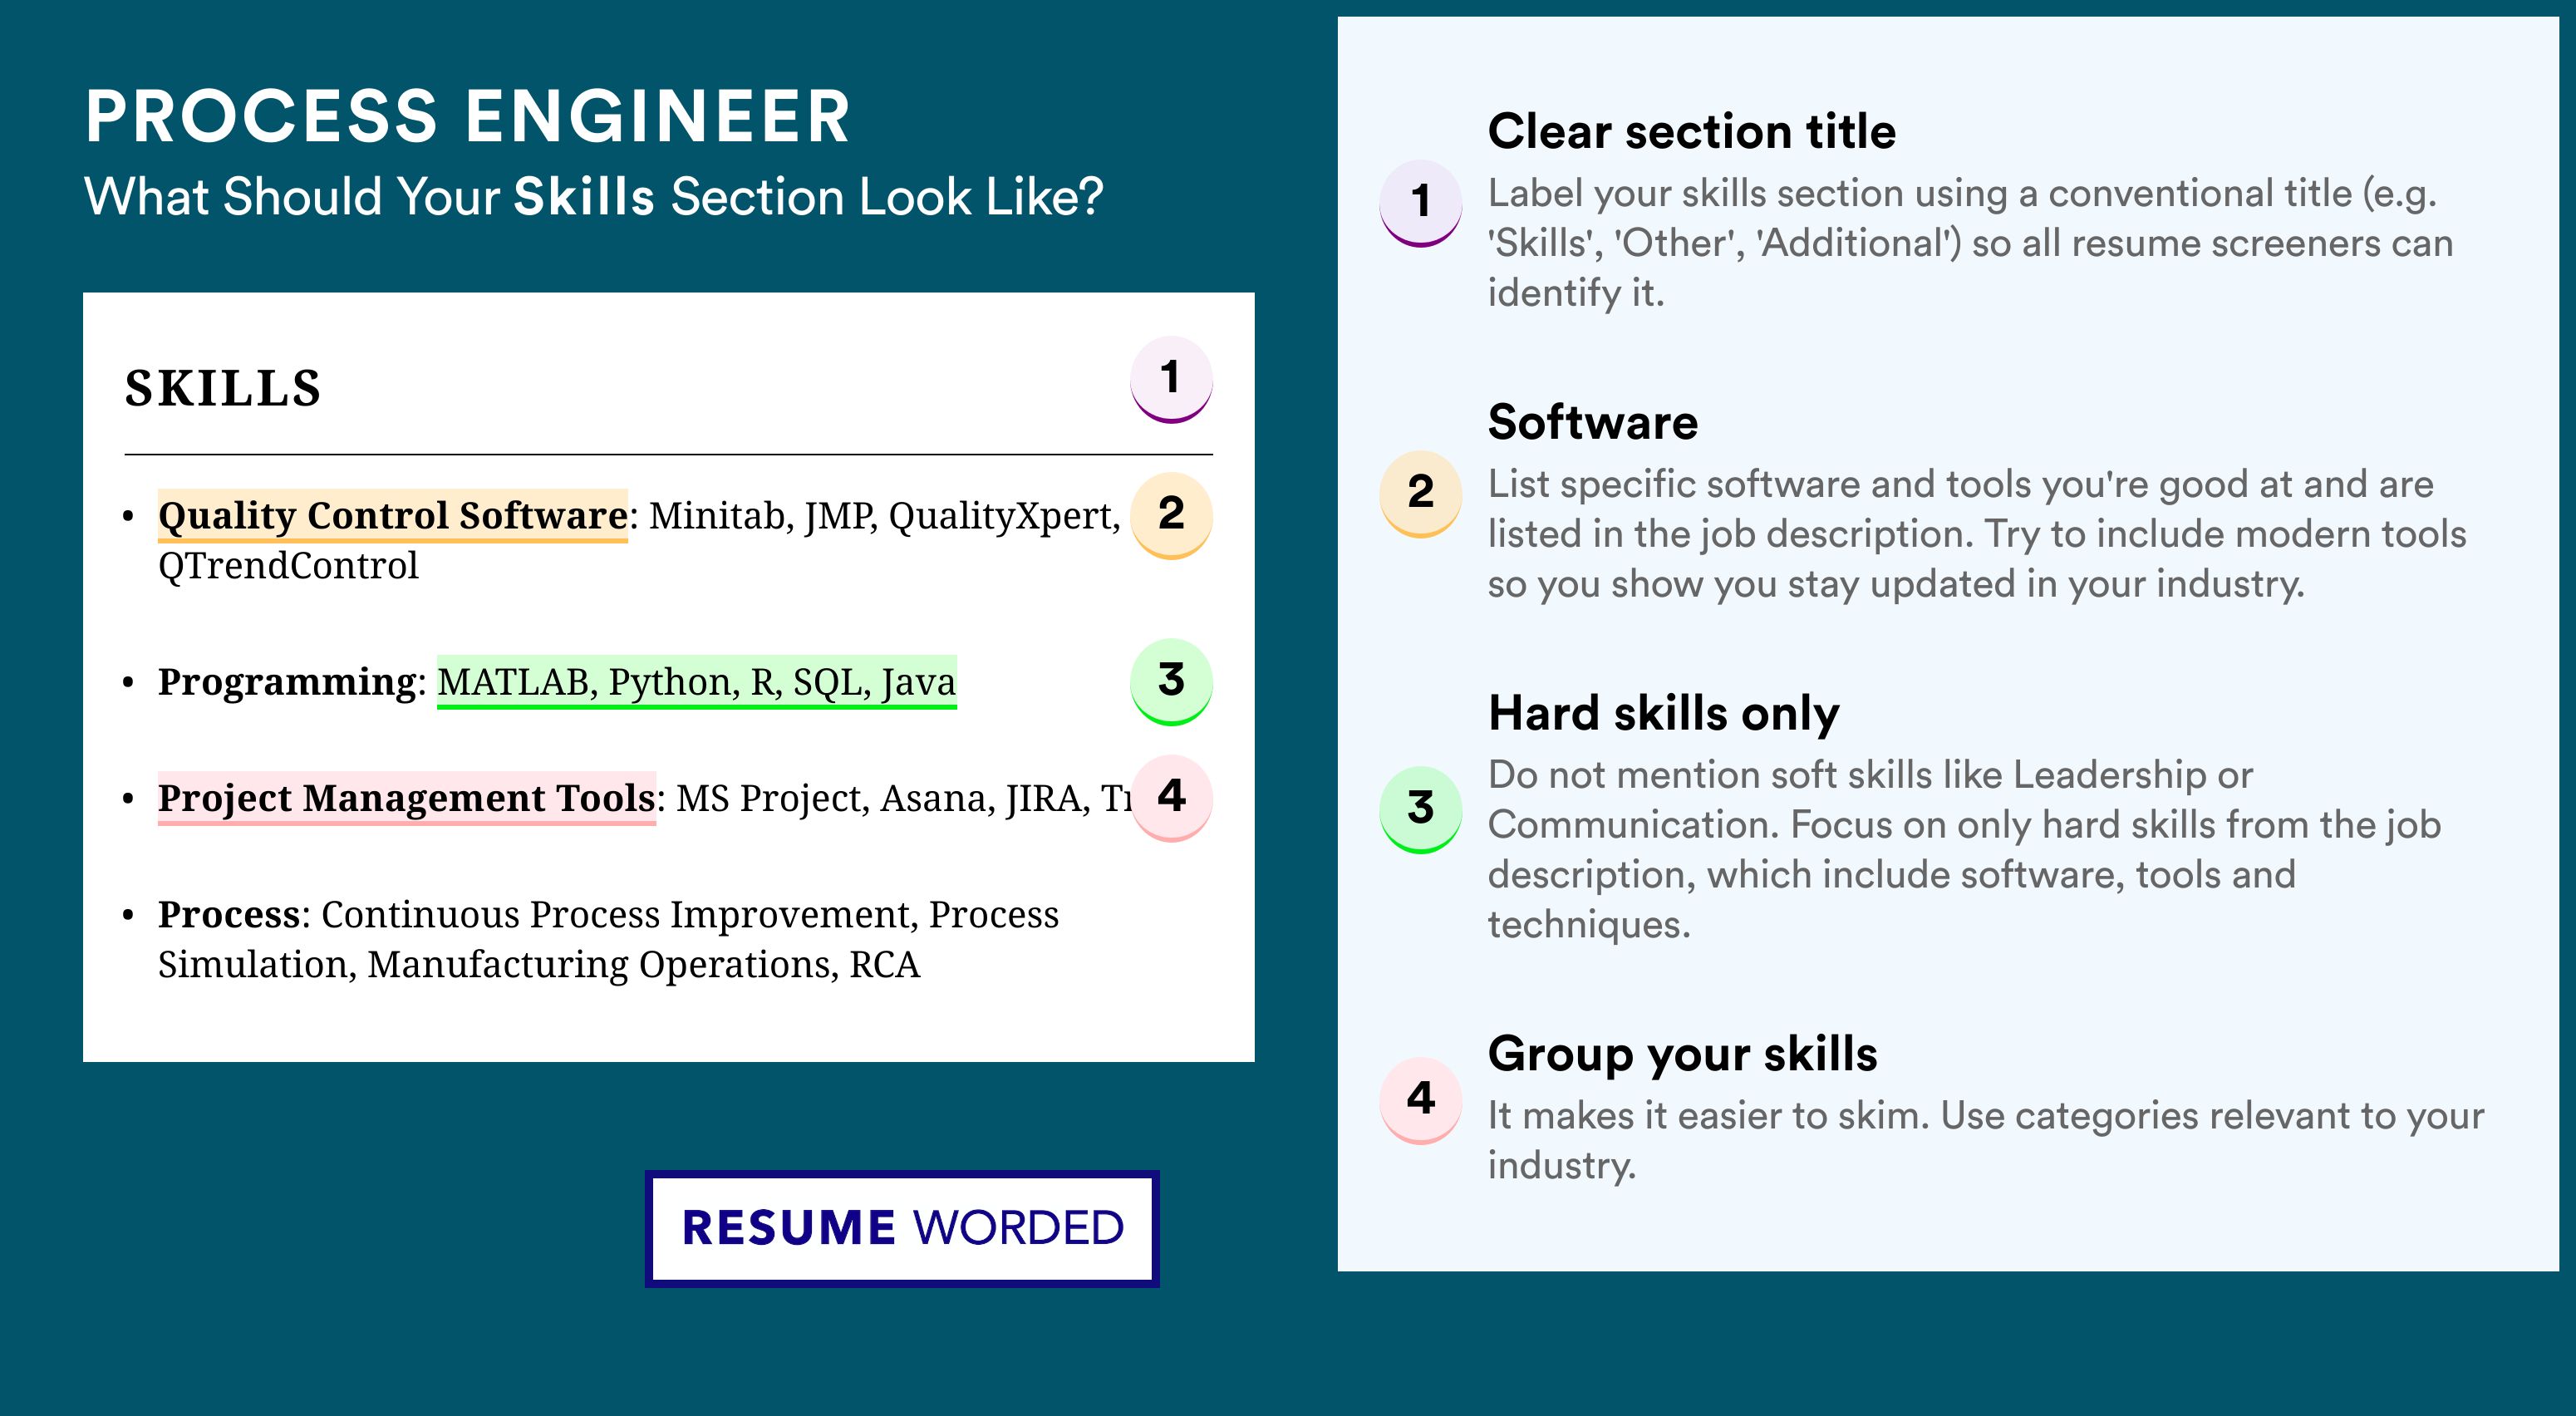 How To Write Your Skills Section - Process Engineer Roles